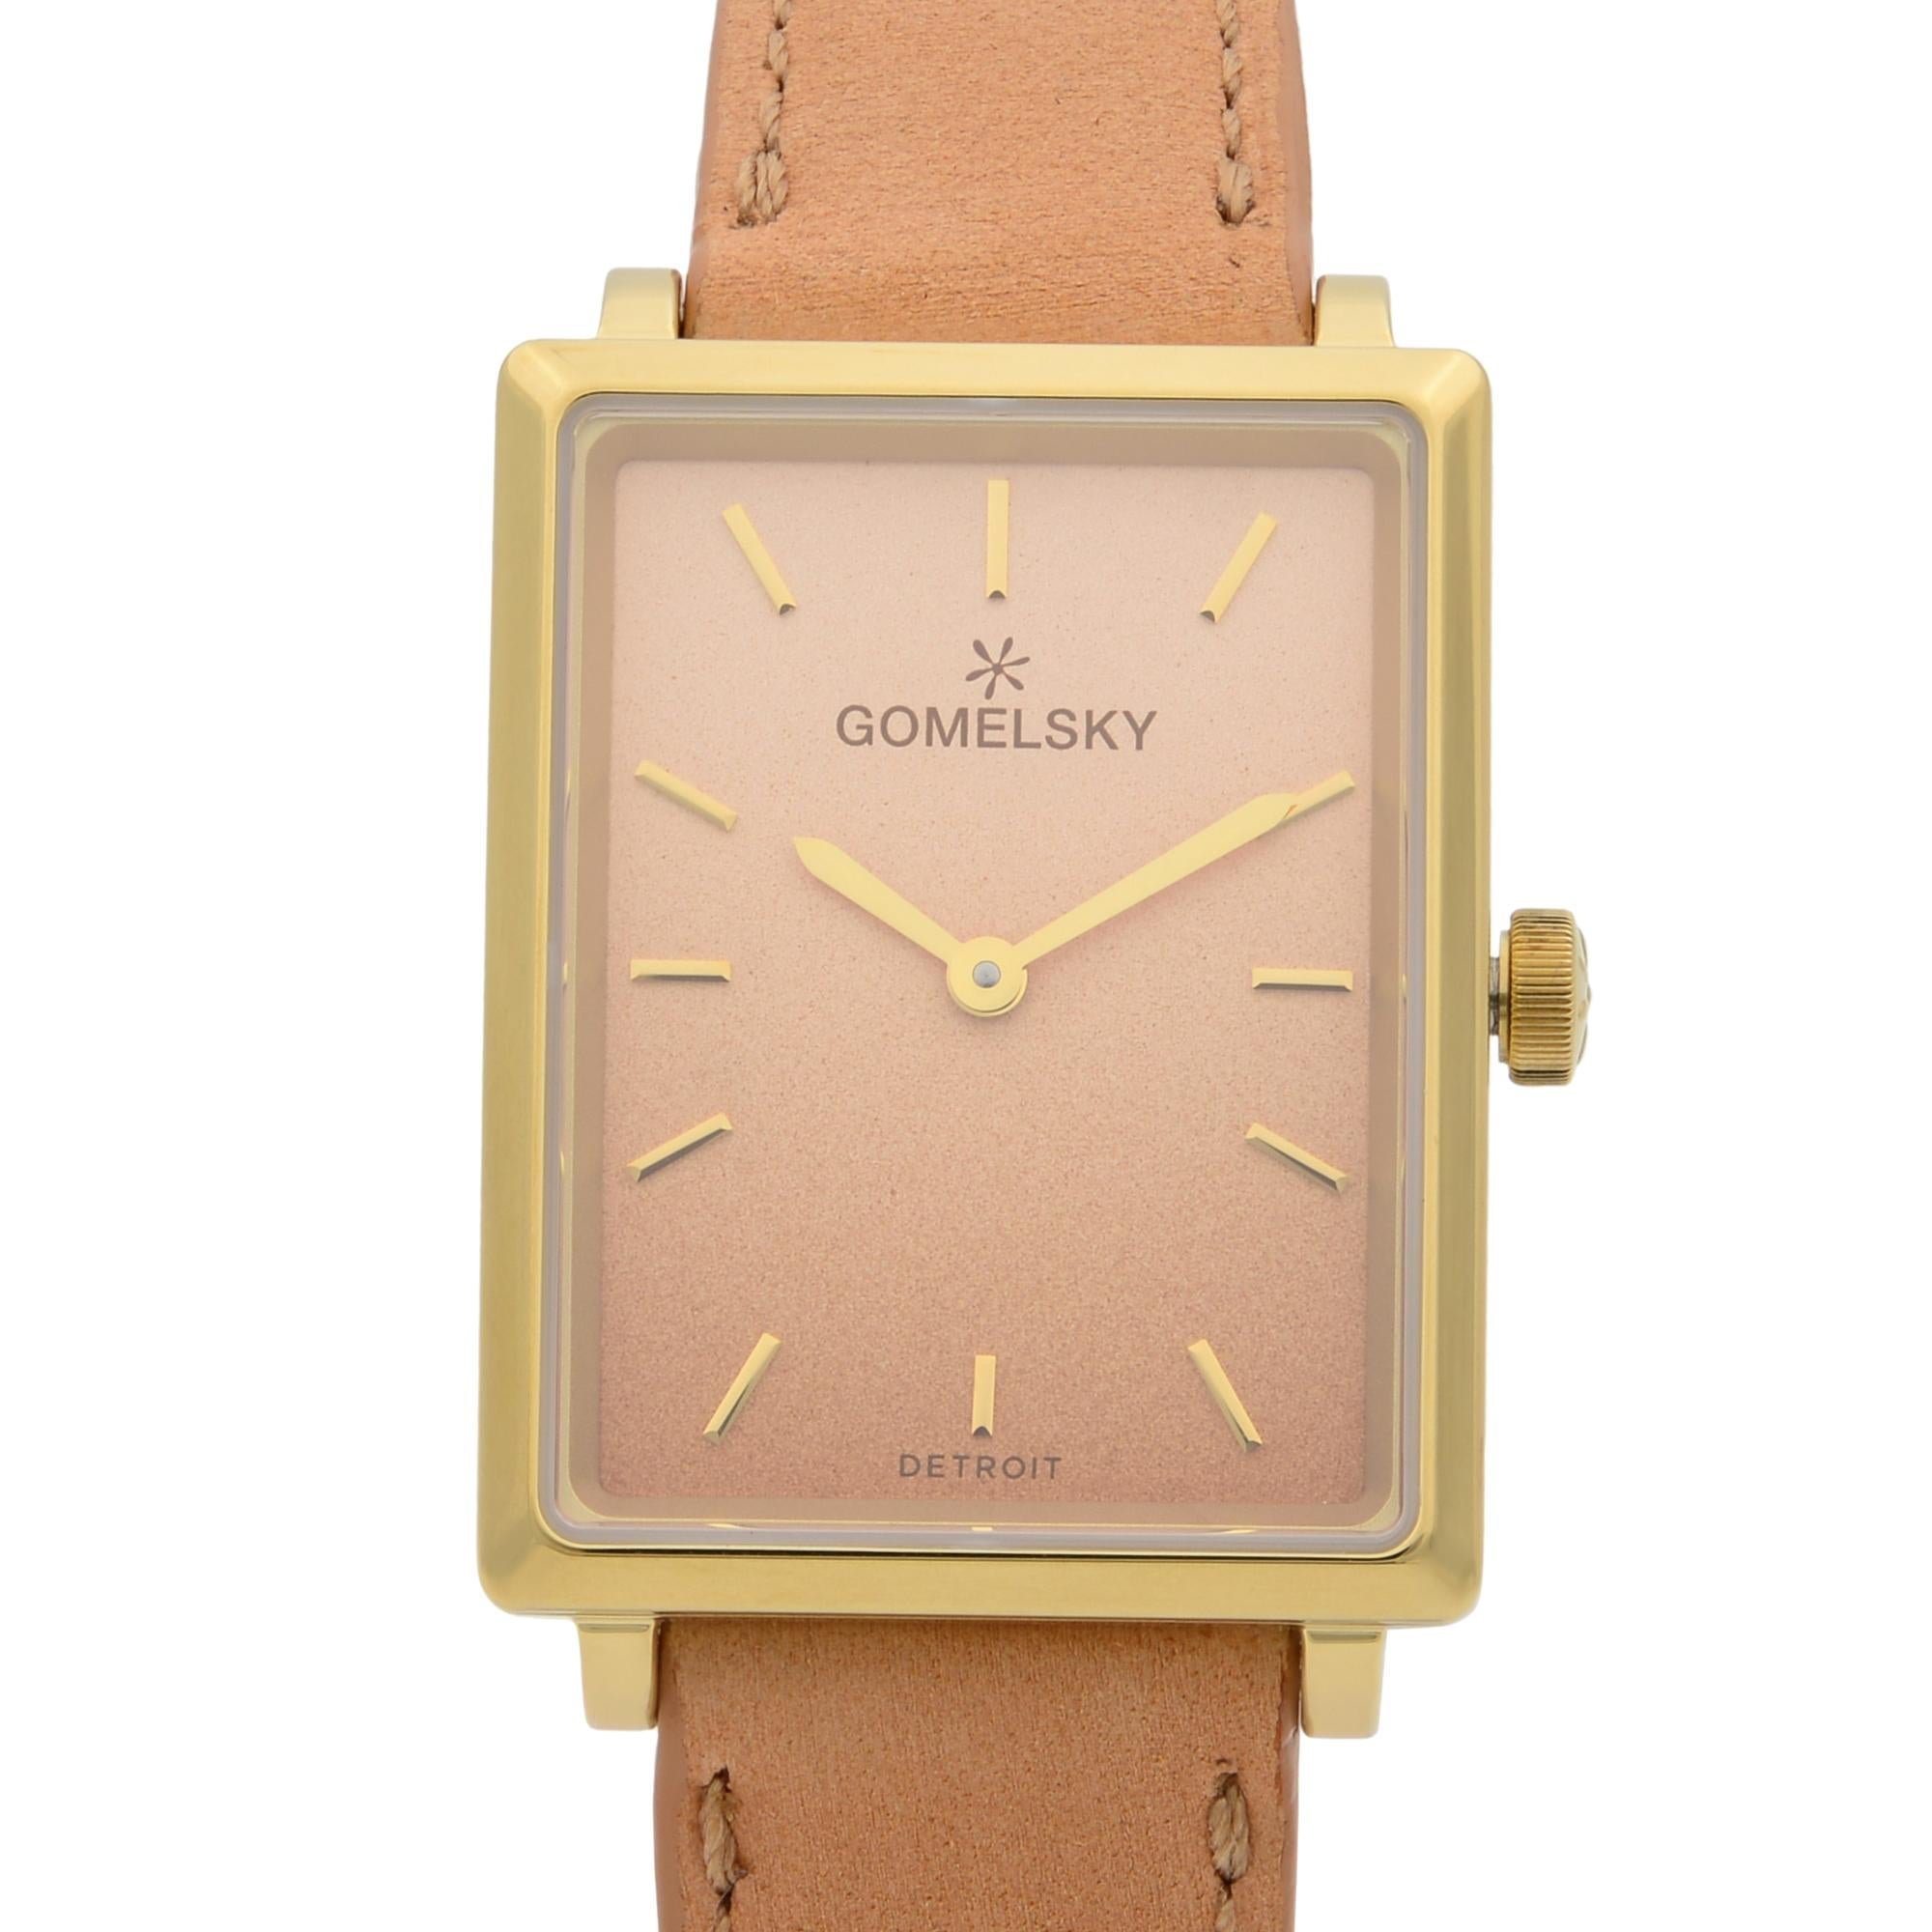 This brand new Gomelsky Shirley  is a beautiful  timepiece that is powered by quartz (battery) movement which is cased in a stainless steel case. It has a  rectangle shape face,  dial and has hand sticks style markers. It is completed with a leather